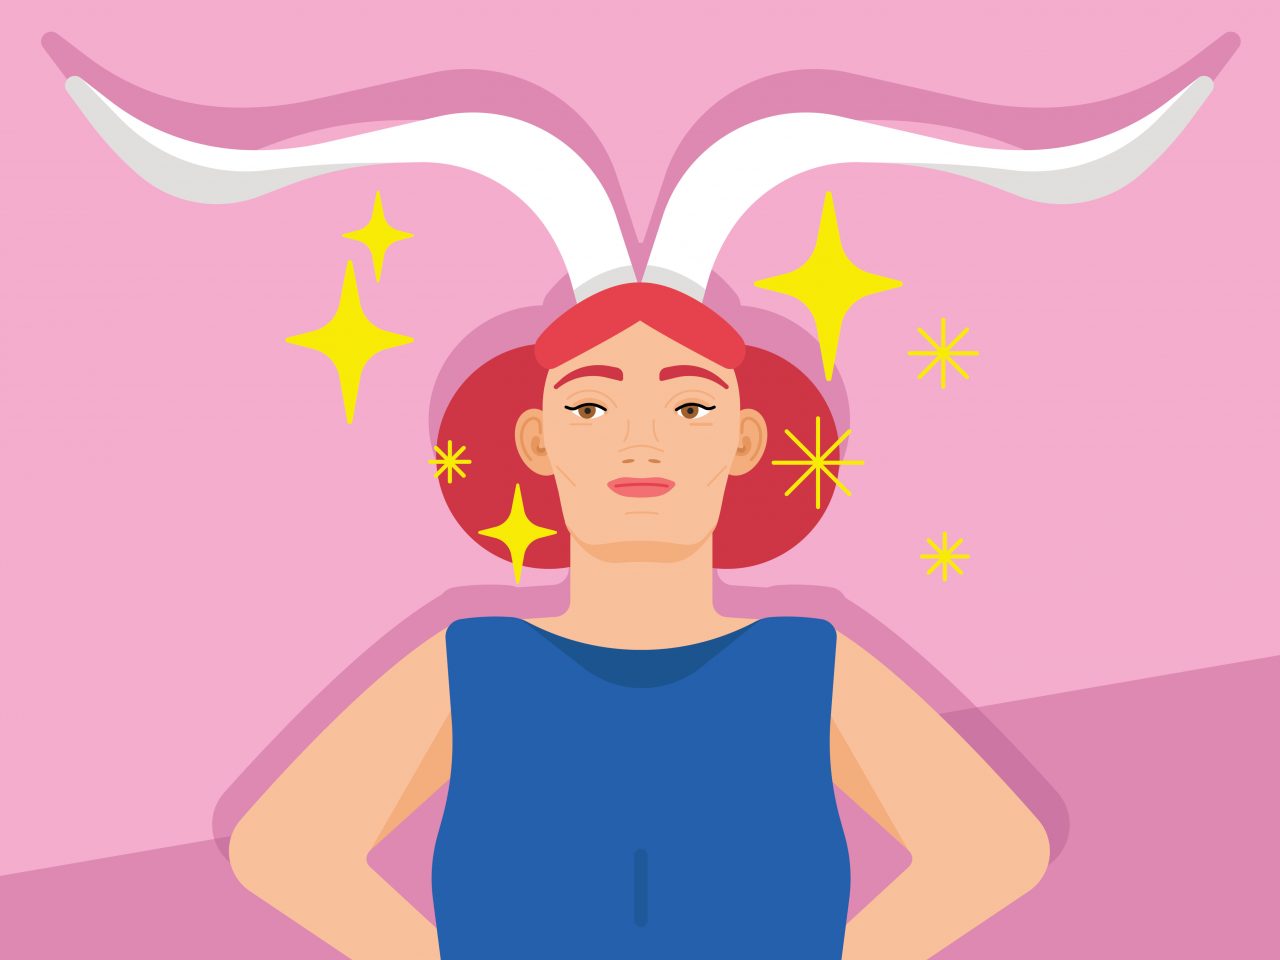 An illustration of a woman with antlers and stars against a pink background representing the capricorn astrology horoscope sign